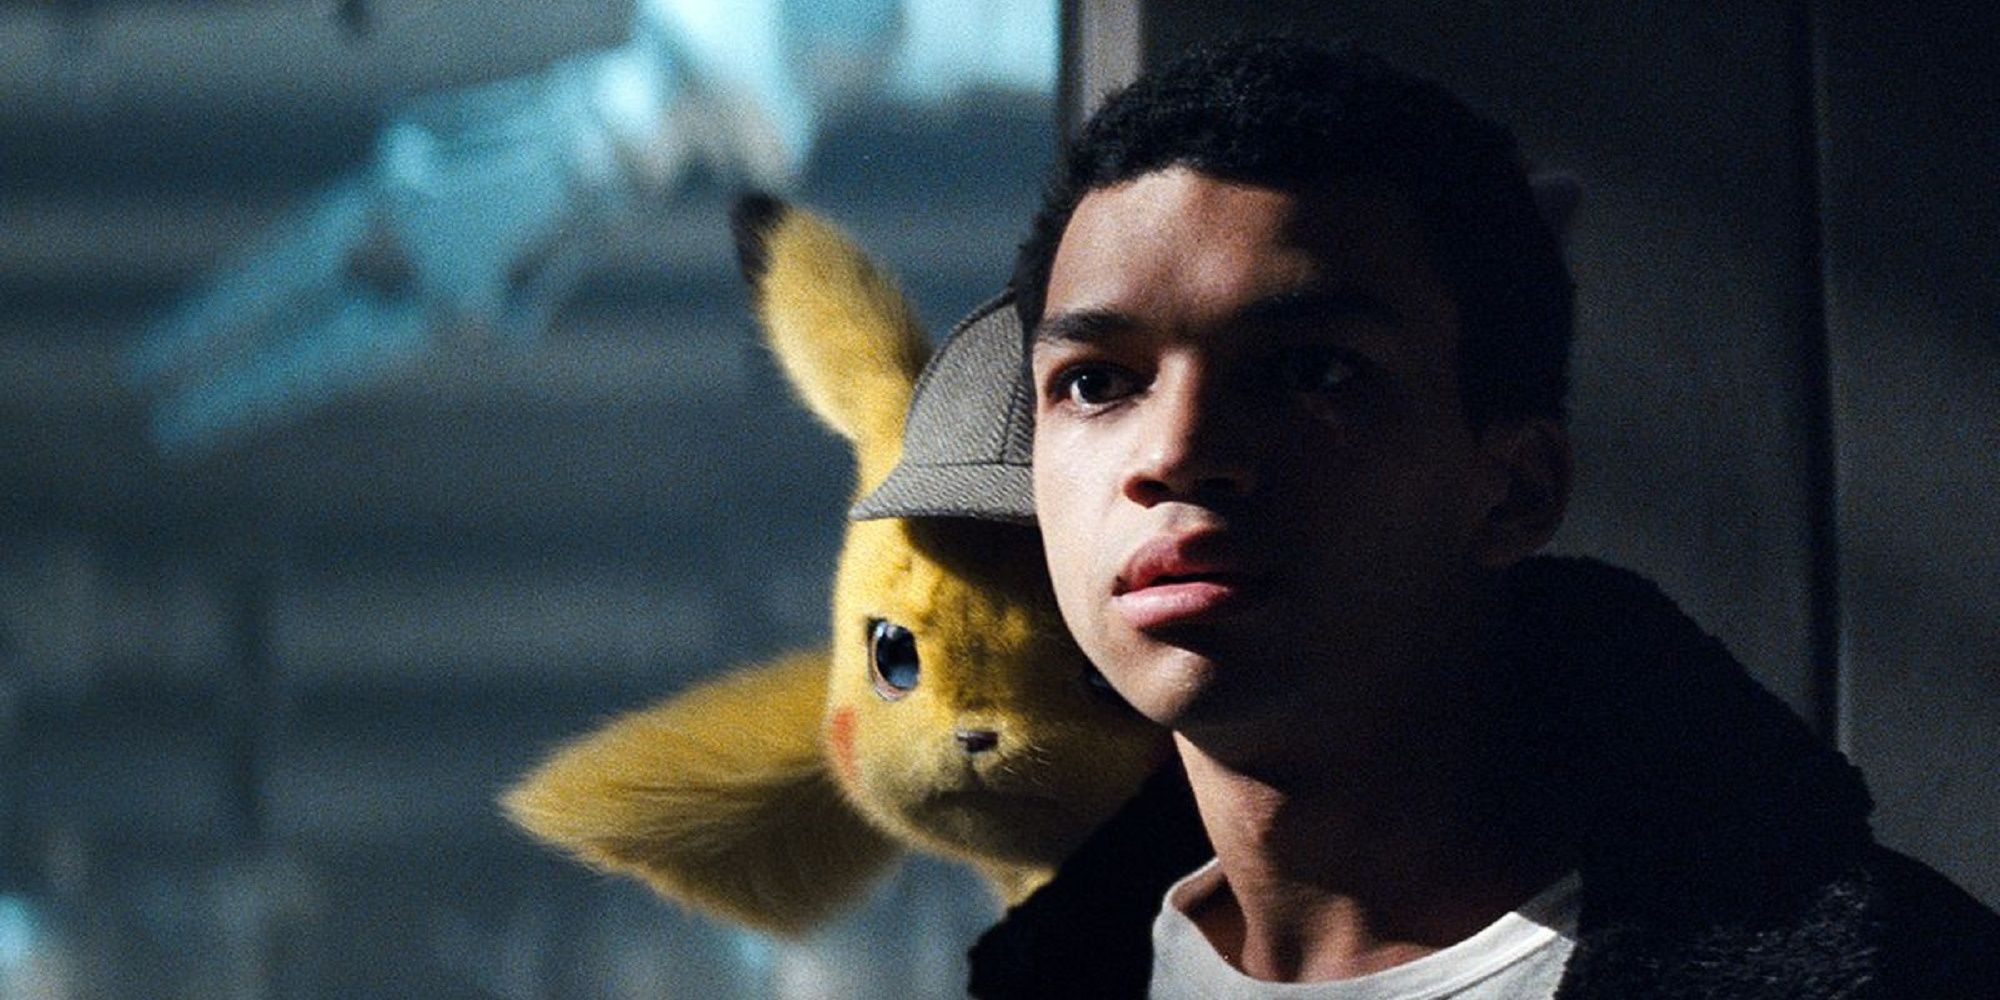 Tim and Pikachu looking out a window in Detective Pikachu.